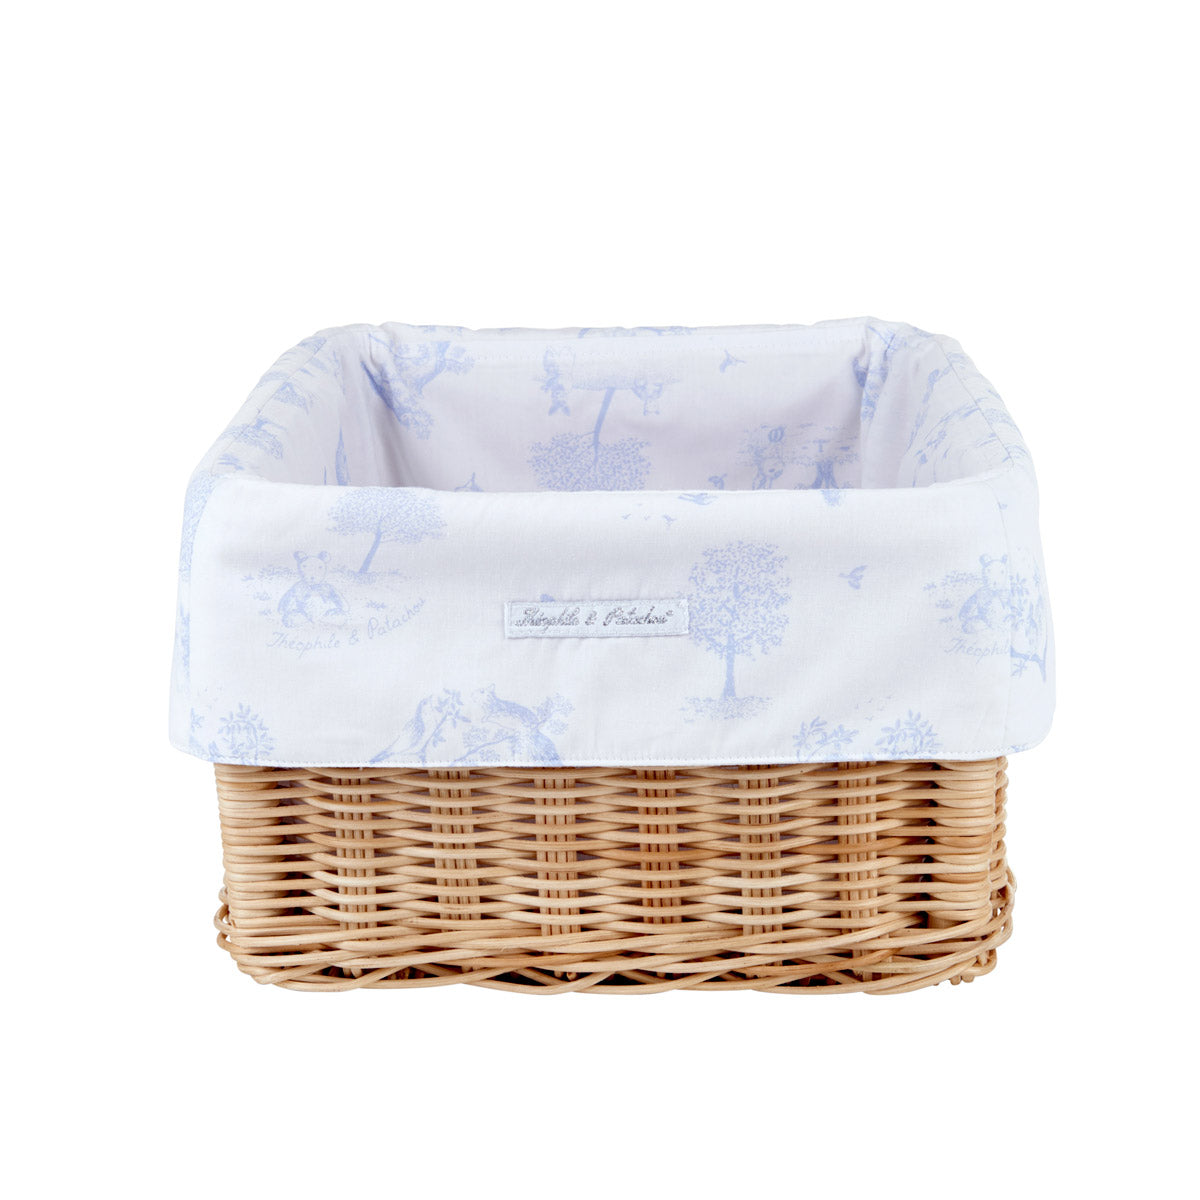 Theophile & Patachou Natural Wicker Basket and Cover Cotton - Printed Sweet Blue